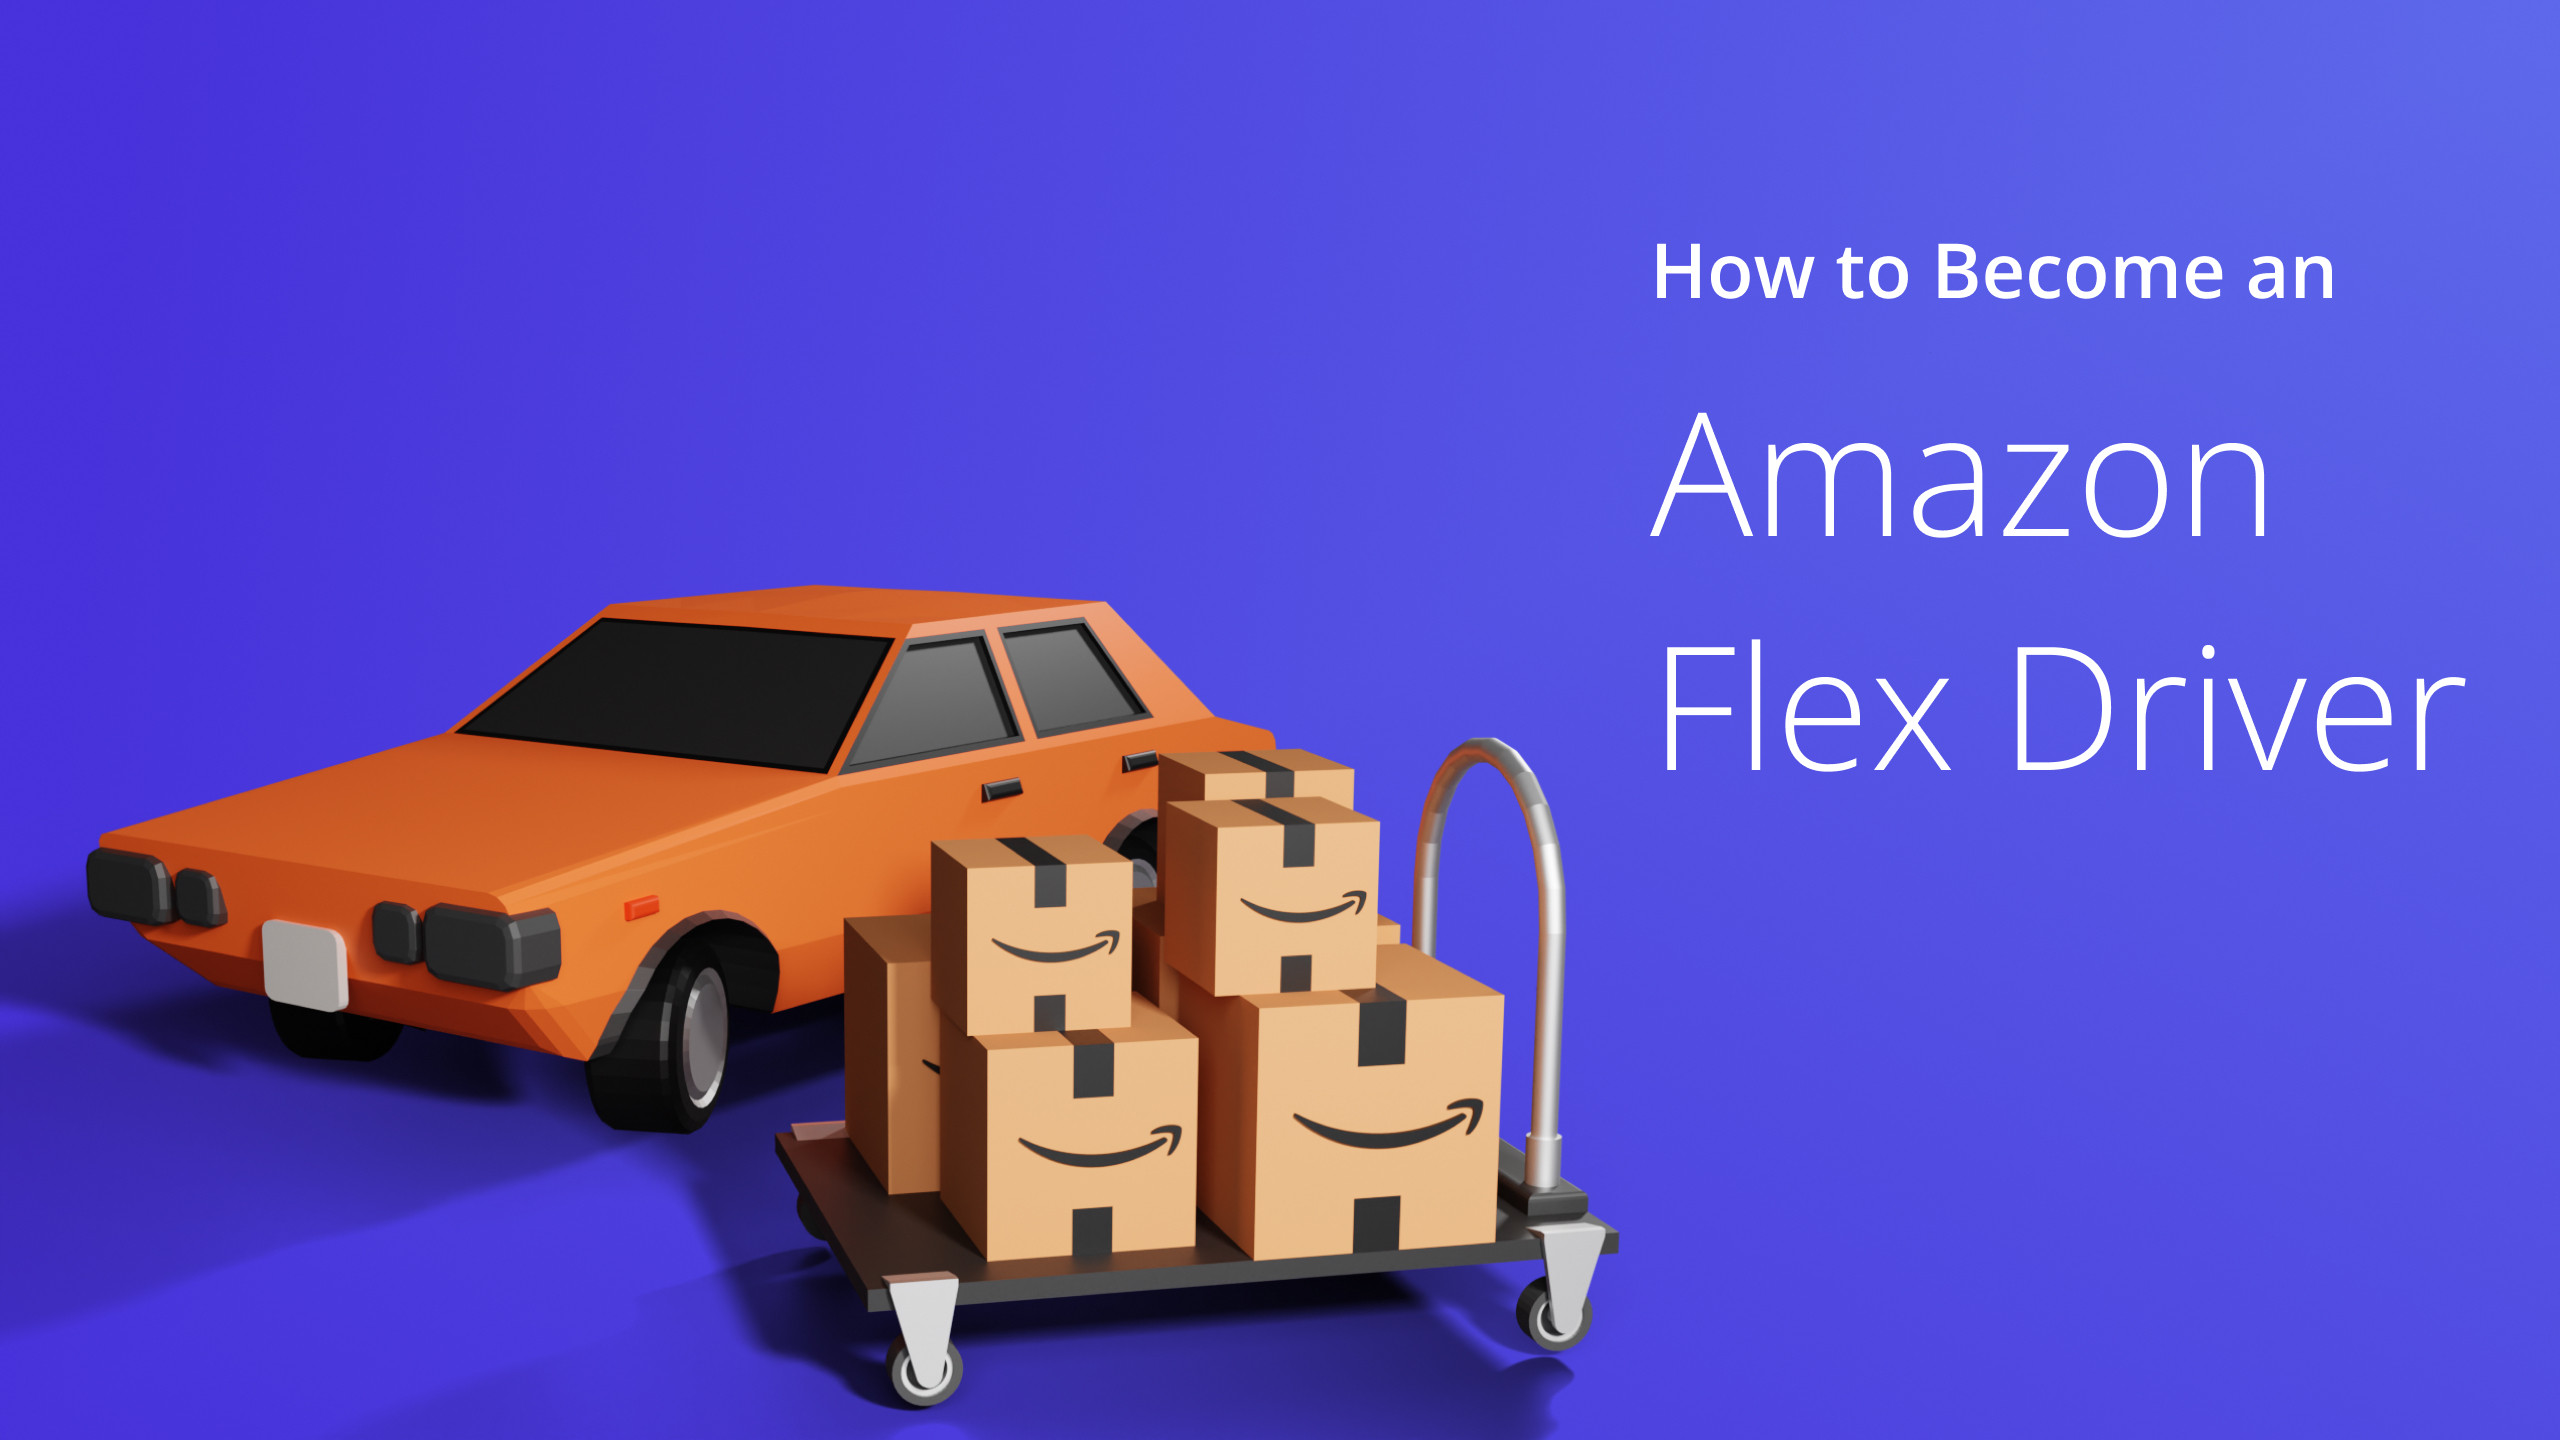 Becoming Amazon Flex Driver: How to, Pros and Cons, Salary